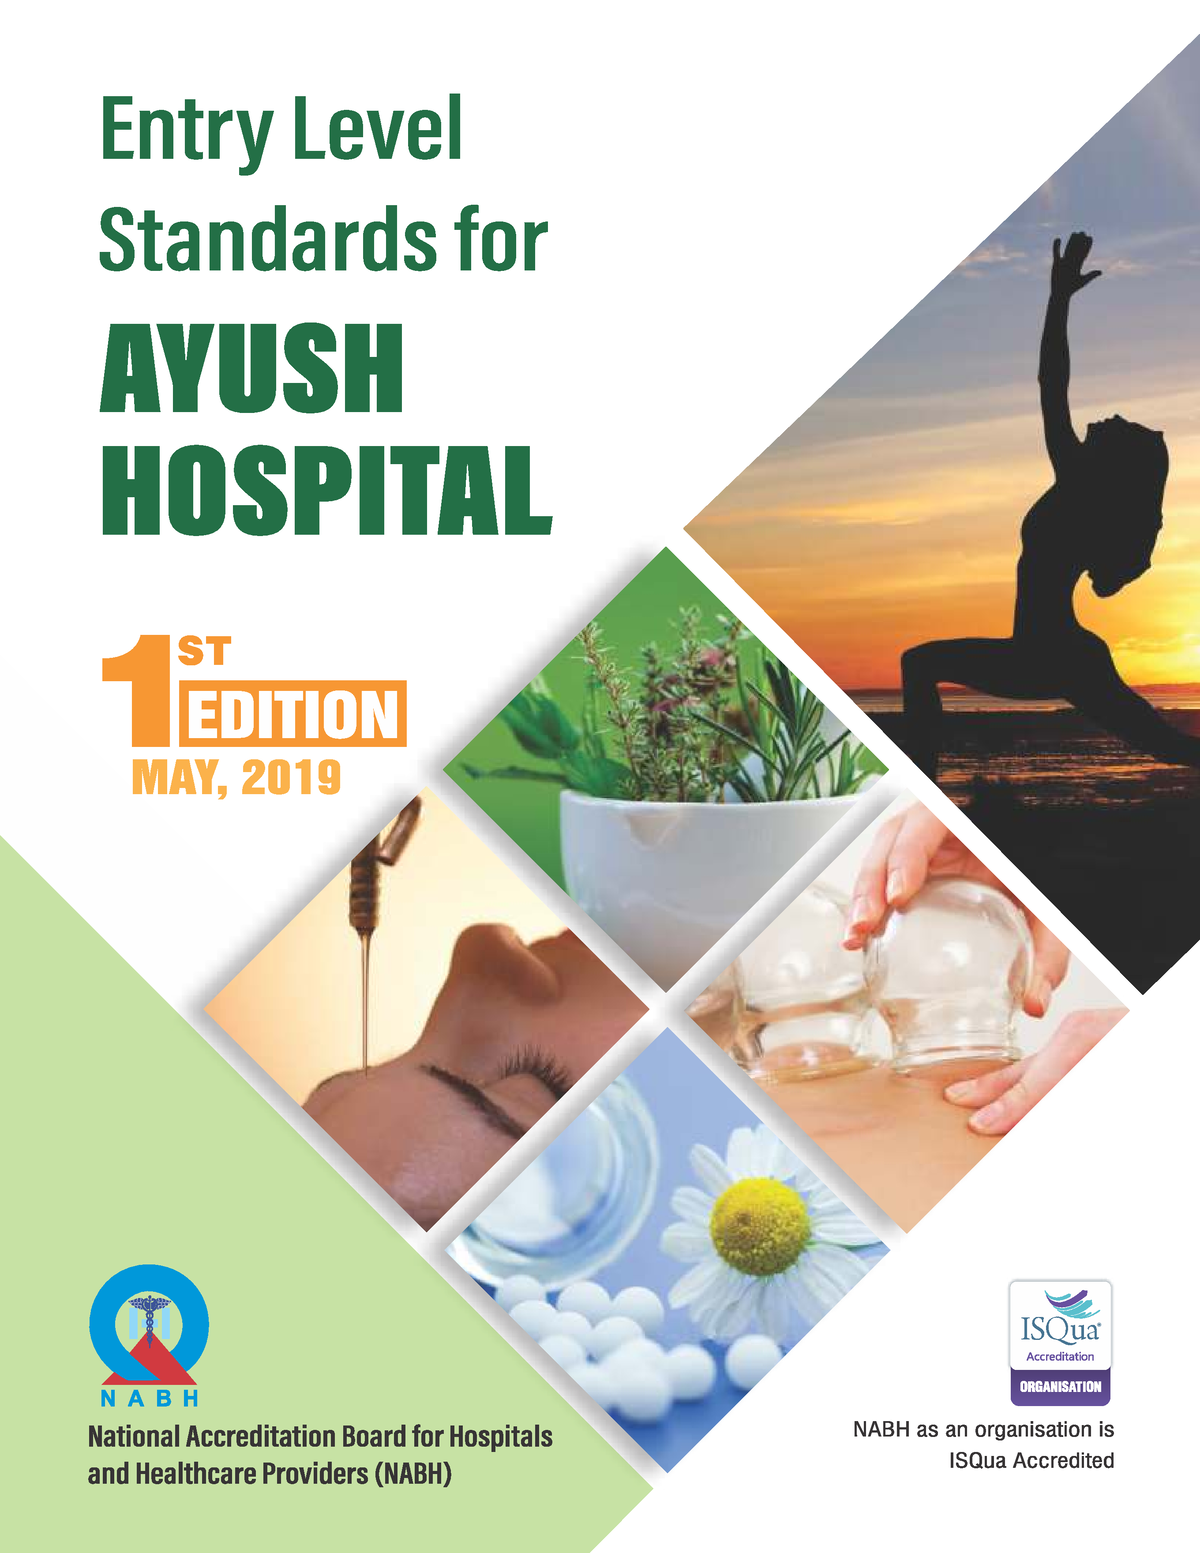 Nabh entry level ayush standard © All Rights Reserved. No part of